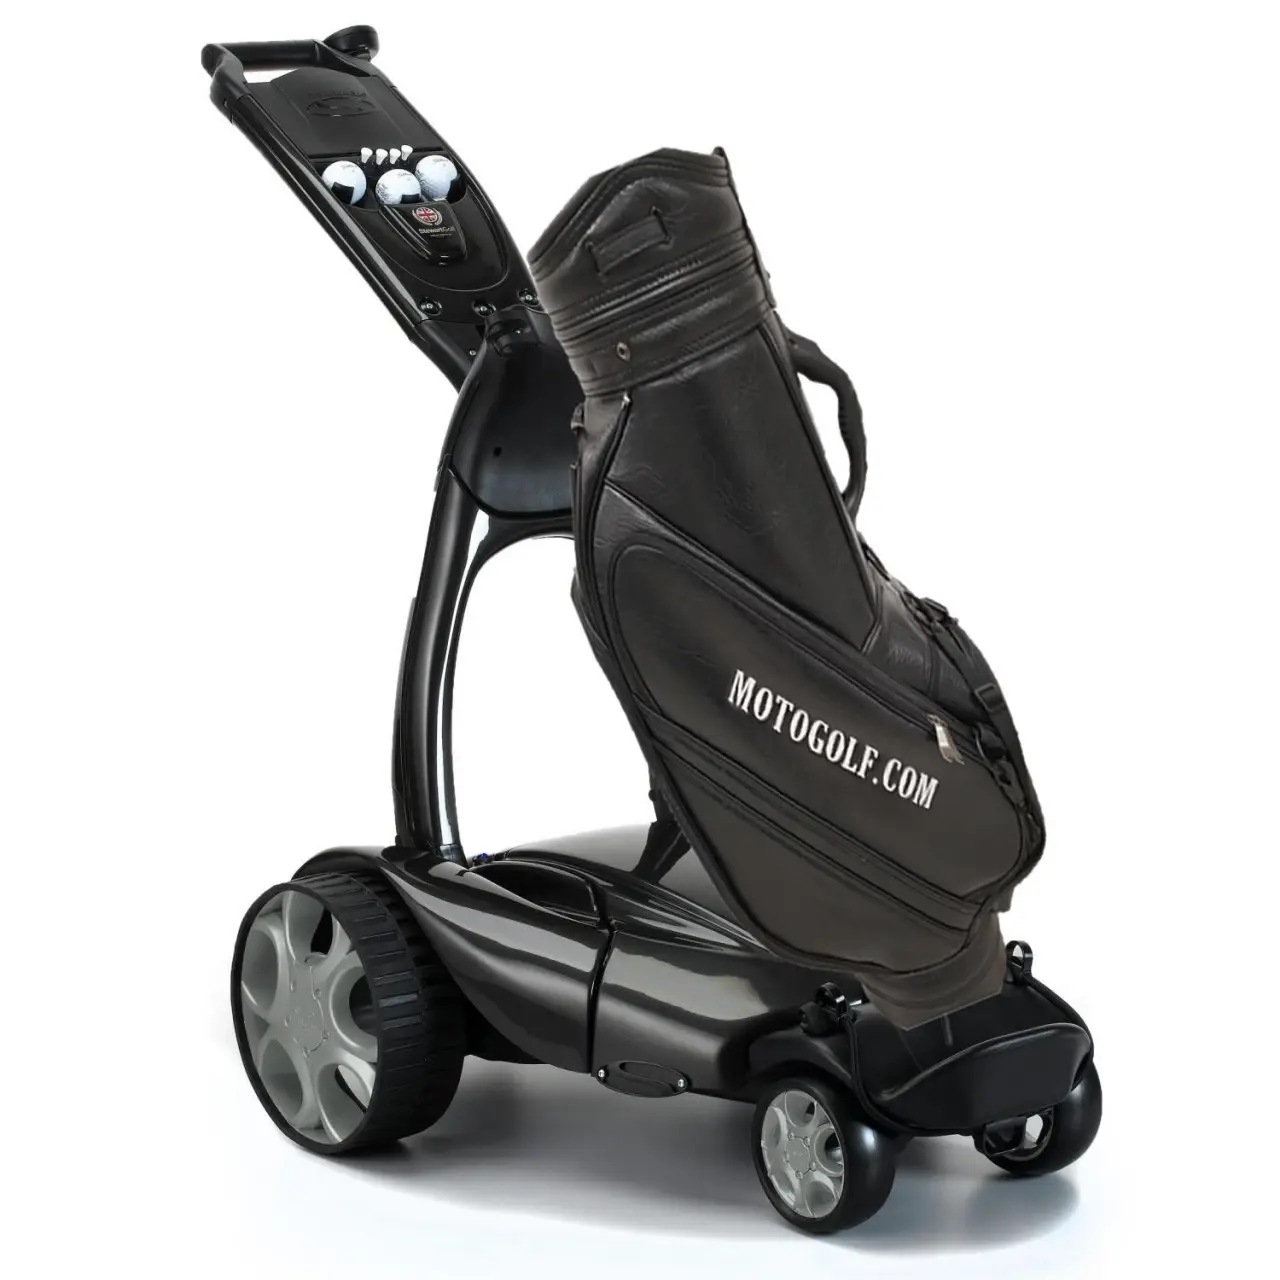 2020 AFFORDABLE New Stewart Golf X9 Follow Electric Cart with Remote control and extra Battery full accessories